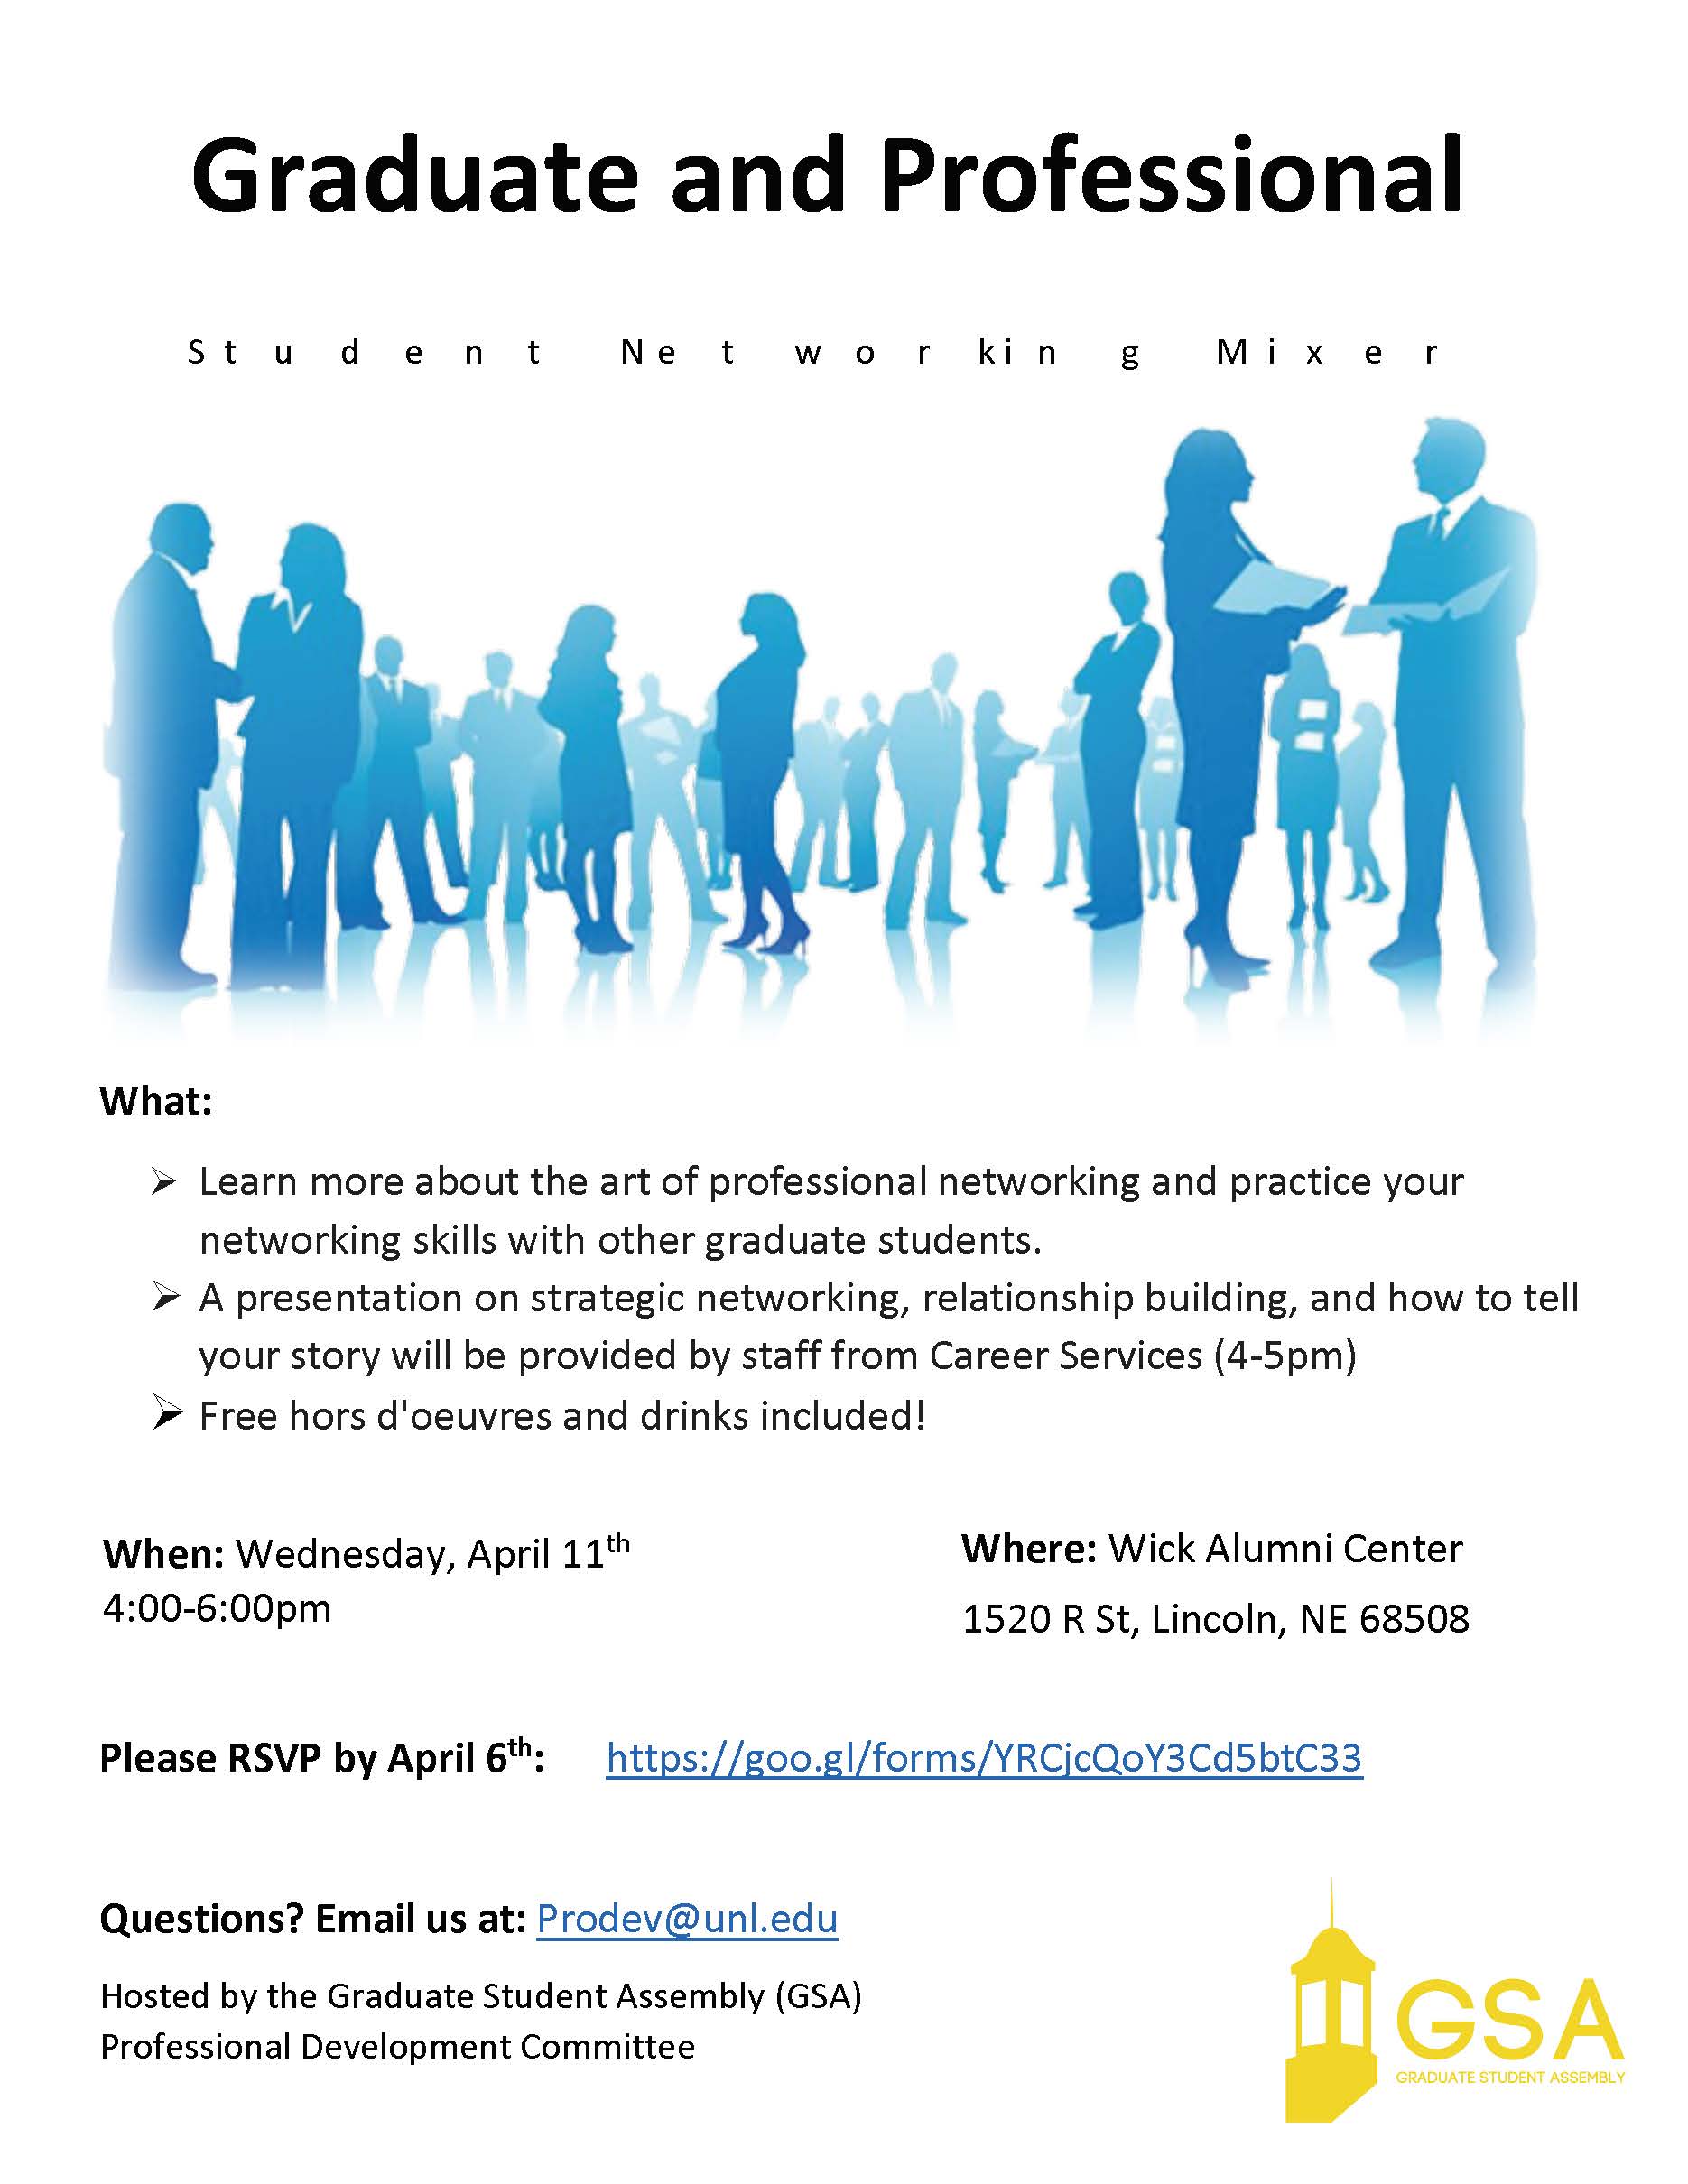 Student Networking Mixer on April 11 (Wednesday) from 4-6PM at the Wick Alumni Center